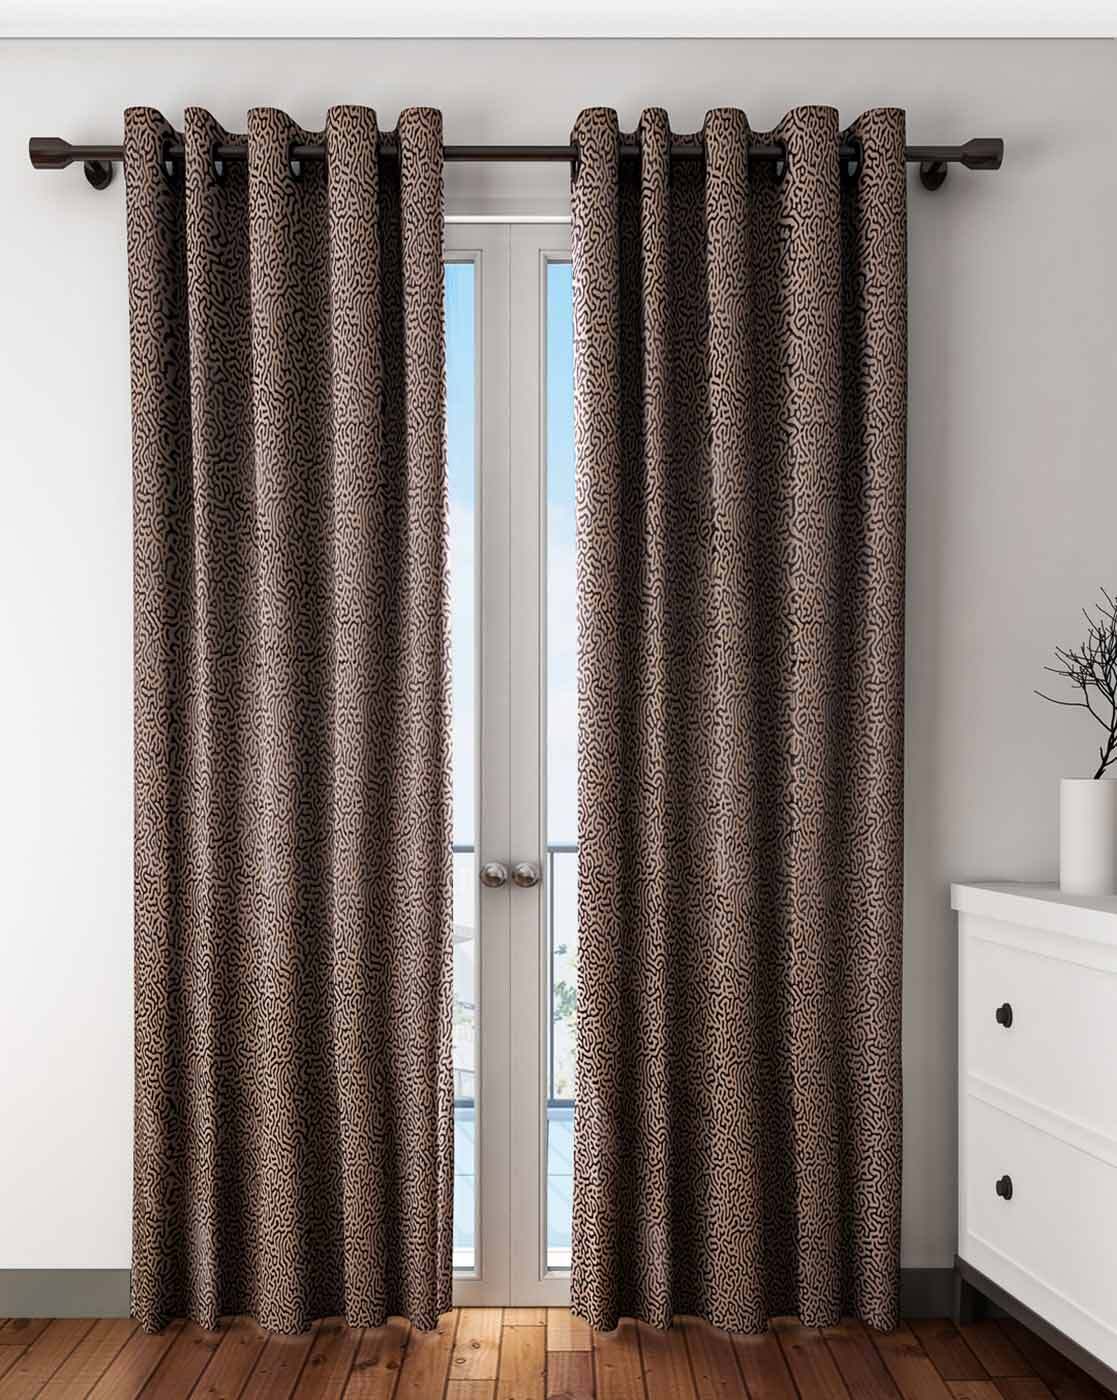 Black Brown Curtains, Black White And Brown Curtains